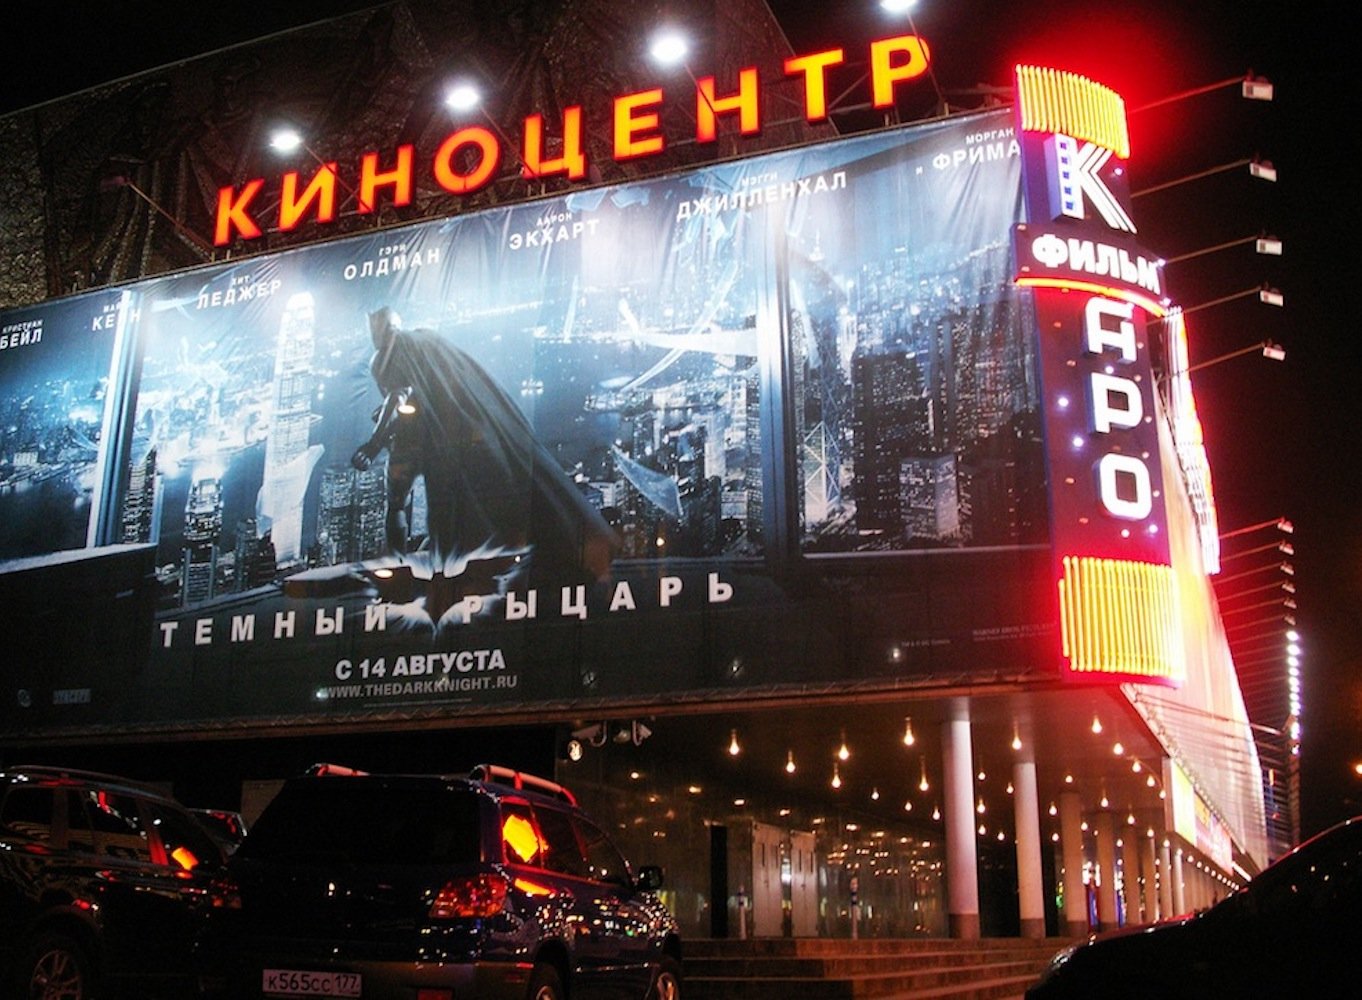 No more drama: Russian Ministry of Culture says cinemas are opening with happy films only